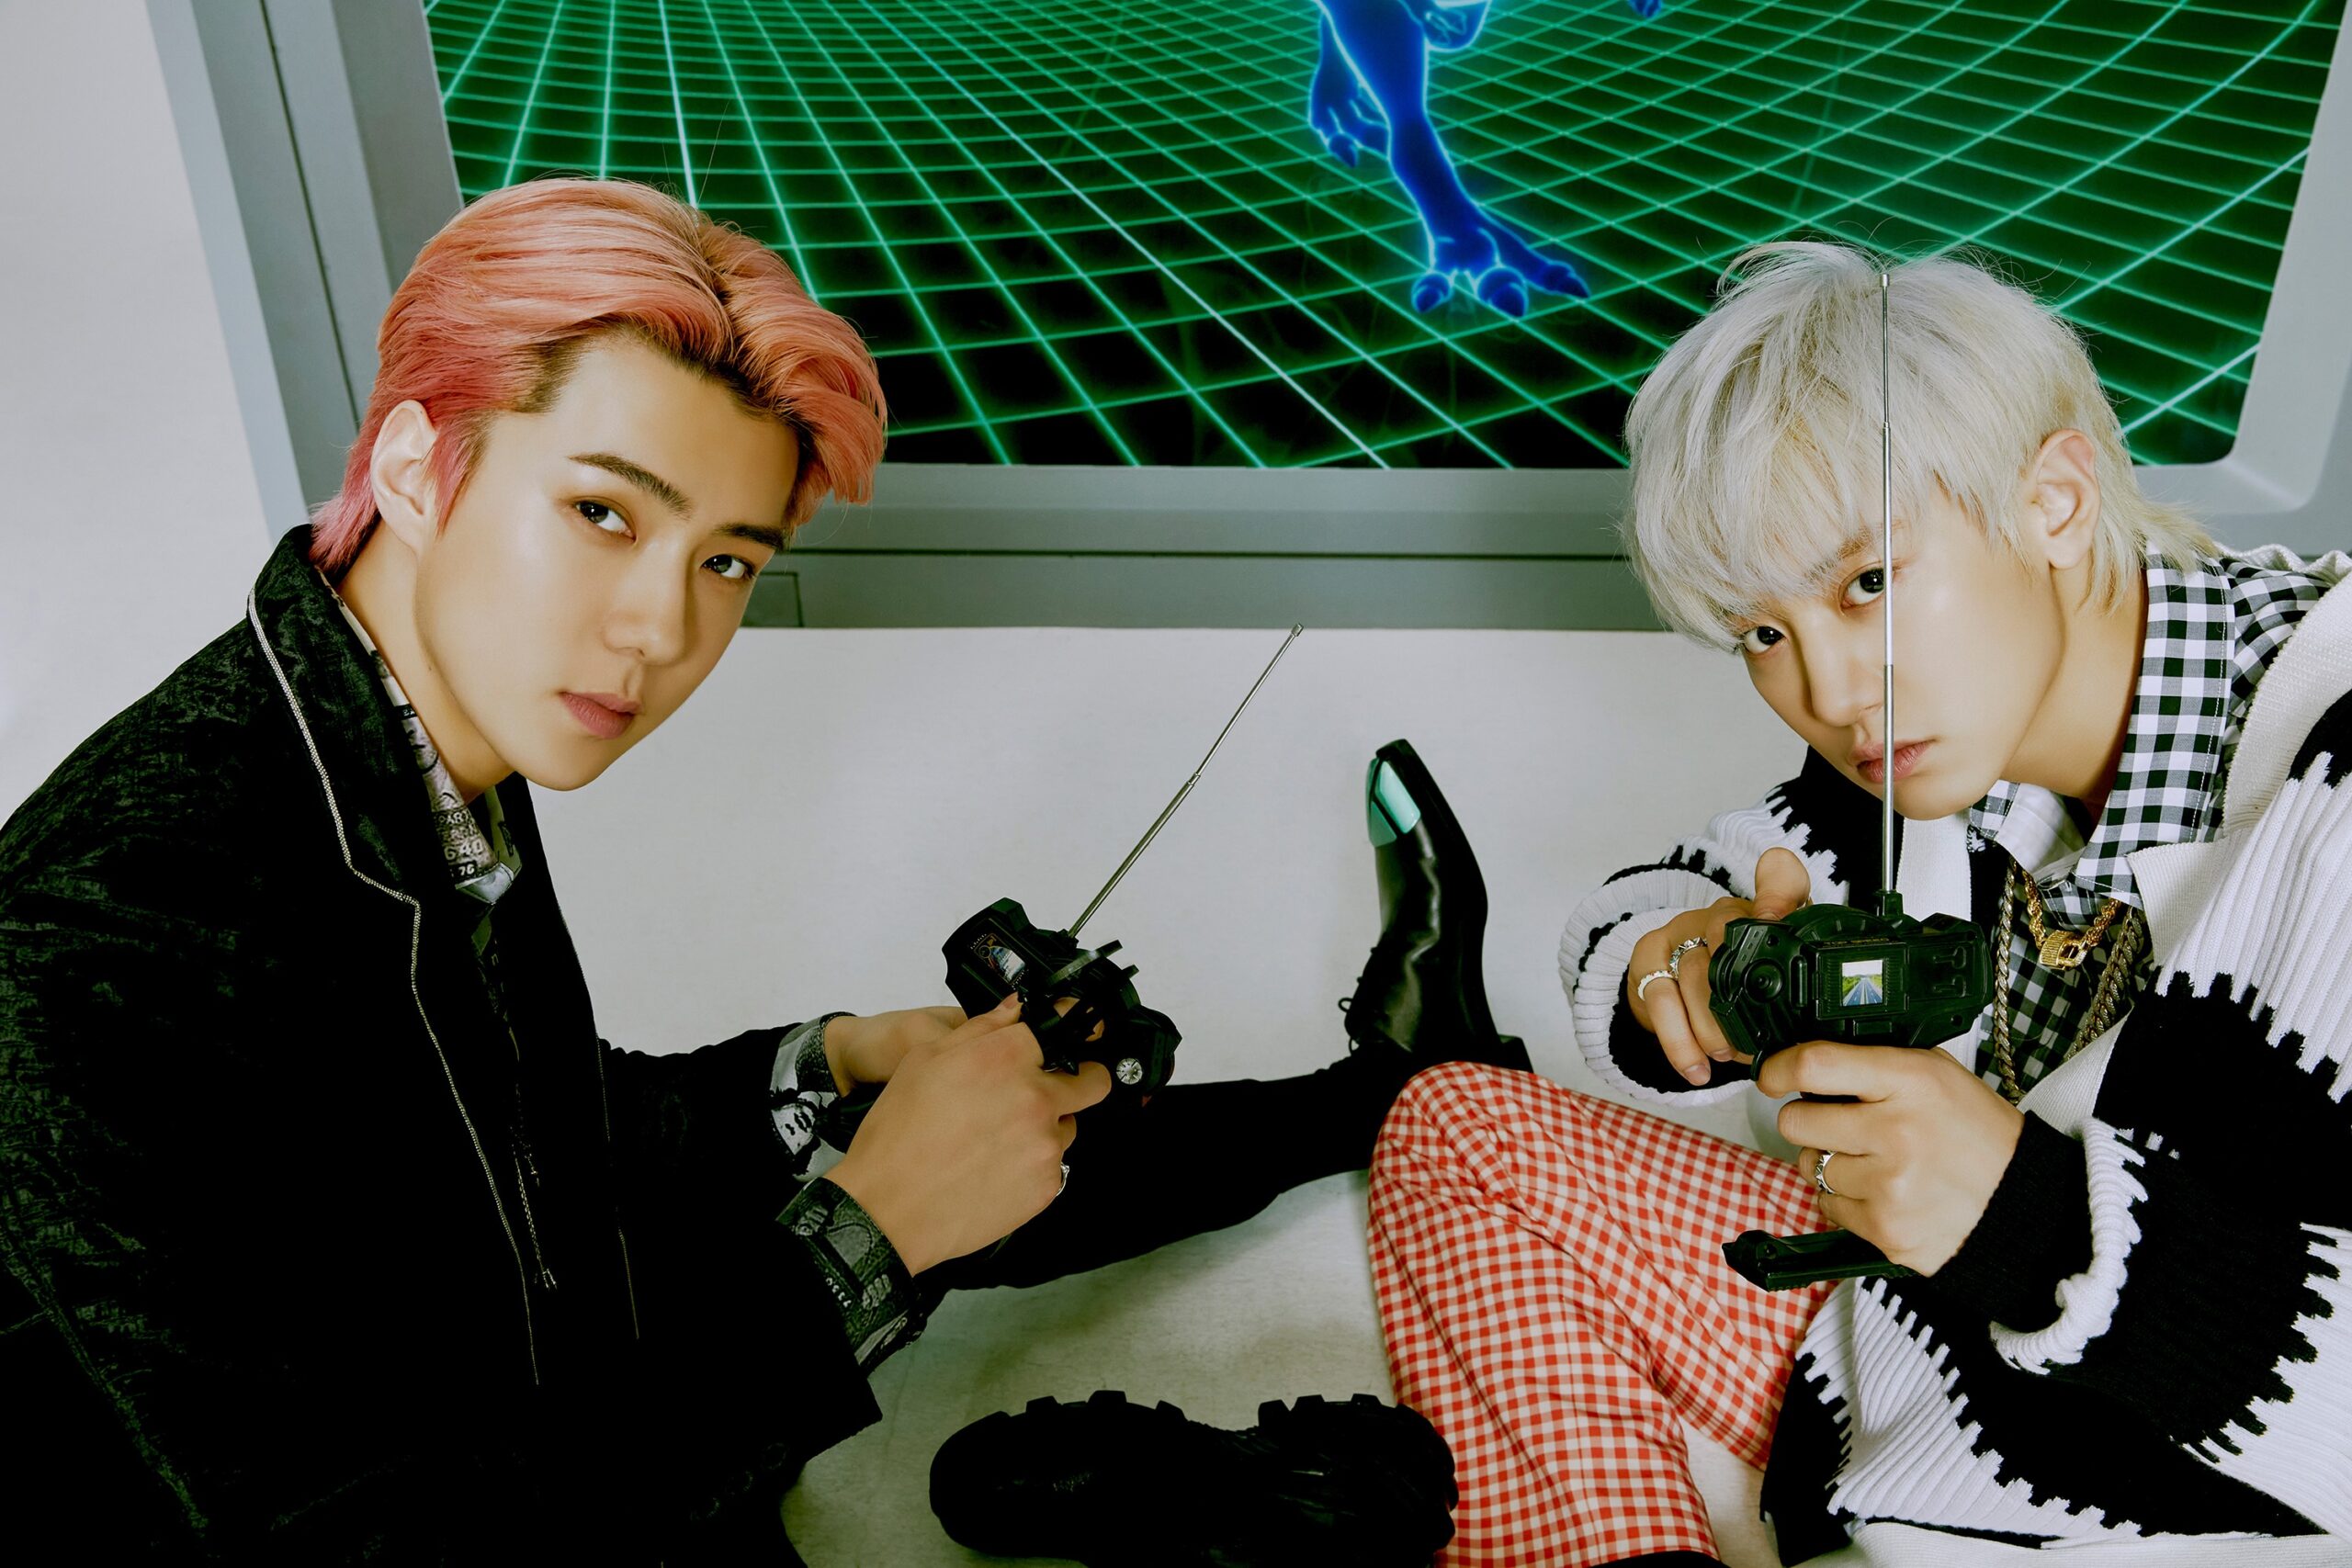 exo-sehun-chanyeol-capture-fans-hearts-by-third-round-of-teaser-image-5